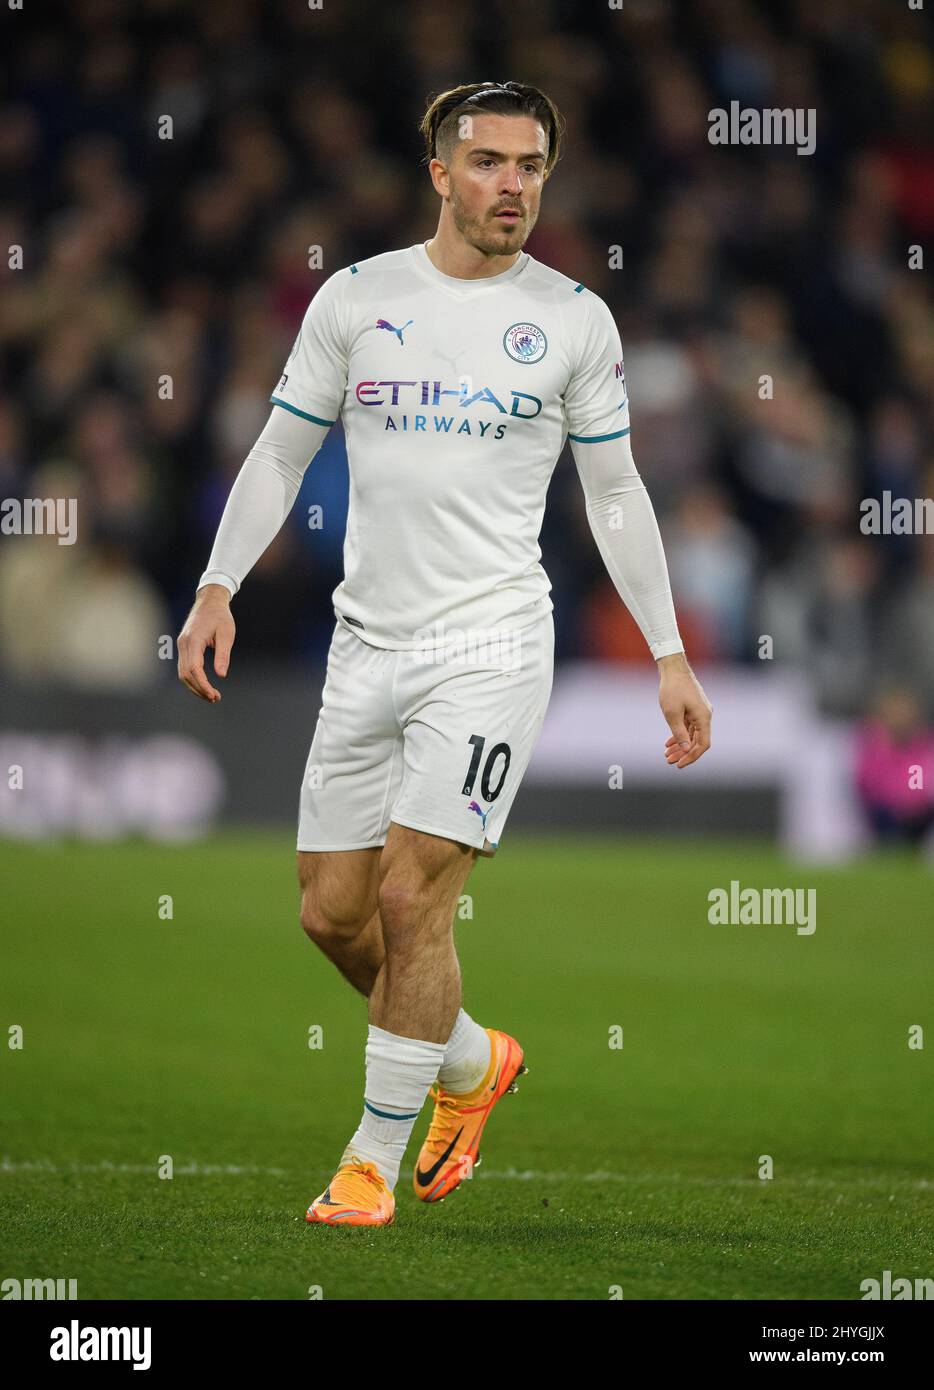 London, UK. 14th Mar, 2022. 14 March 2022 - Crystal Palace v Manchester City - Premier League - Selhurst Park Manchester City's Jack Grealish during the Premier League match at Selhurst Park. Picture Credit : Credit: Mark Pain/Alamy Live News Stock Photo